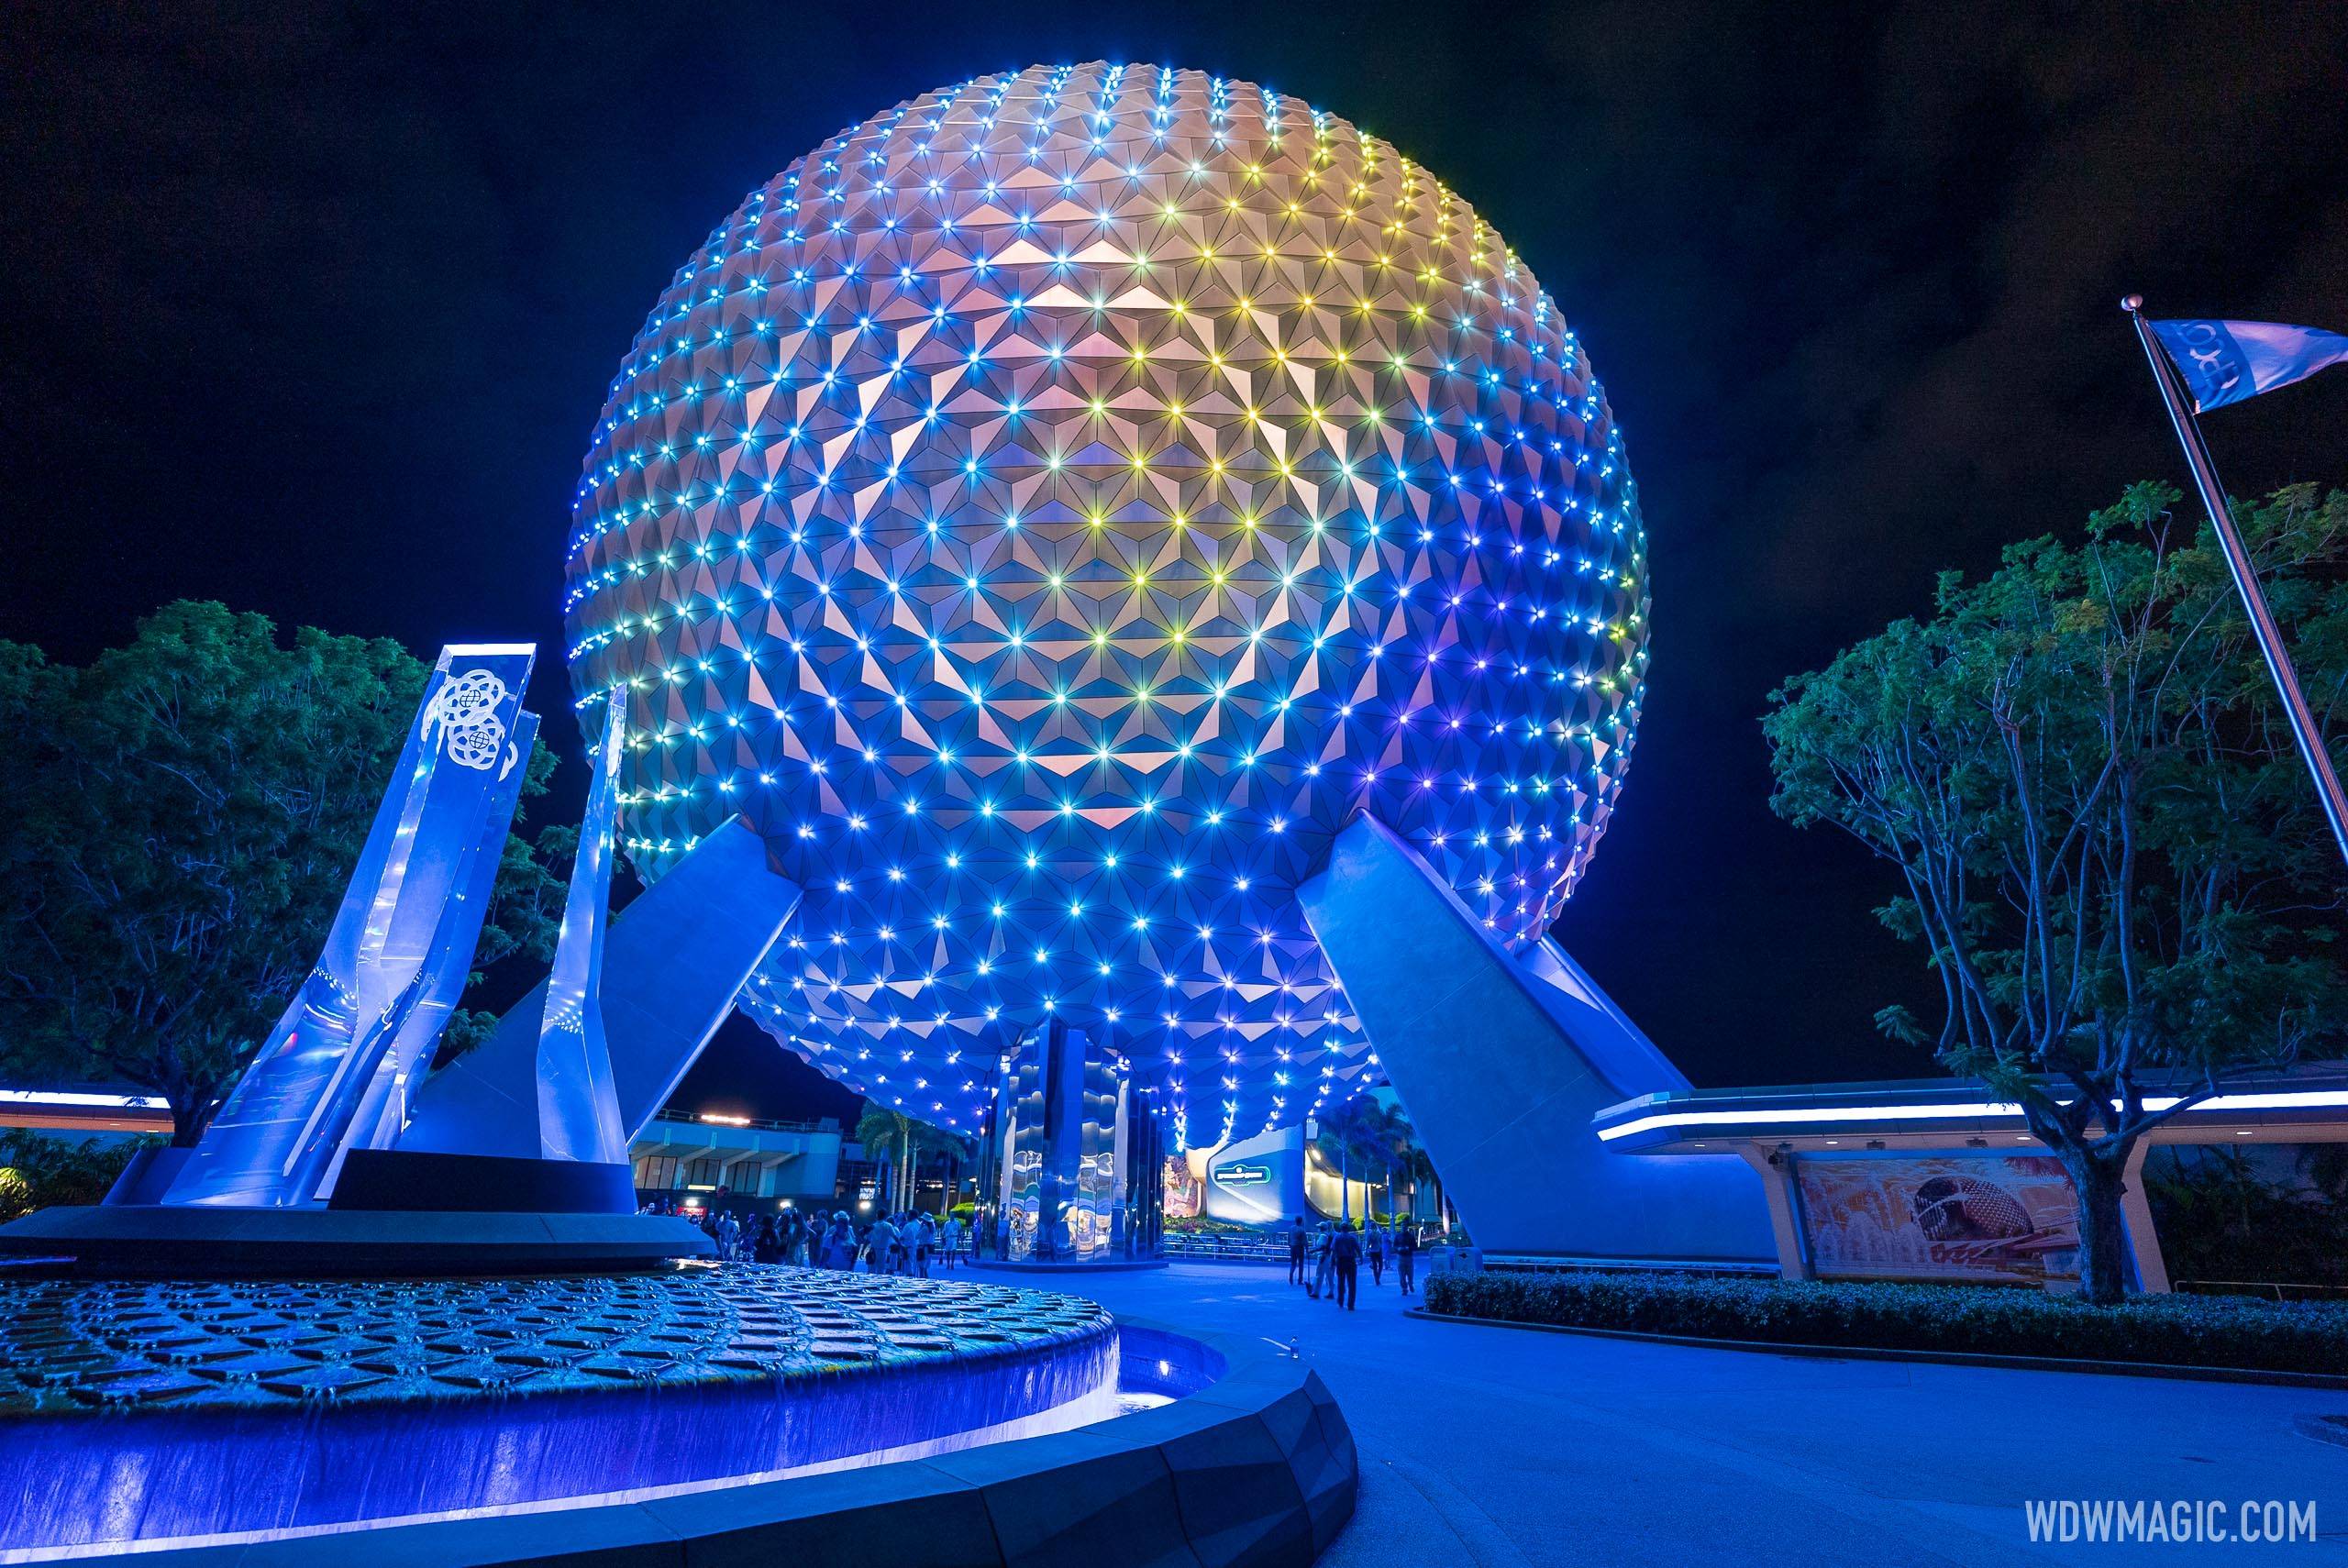 Spaceship Earth new lighting design with points of light